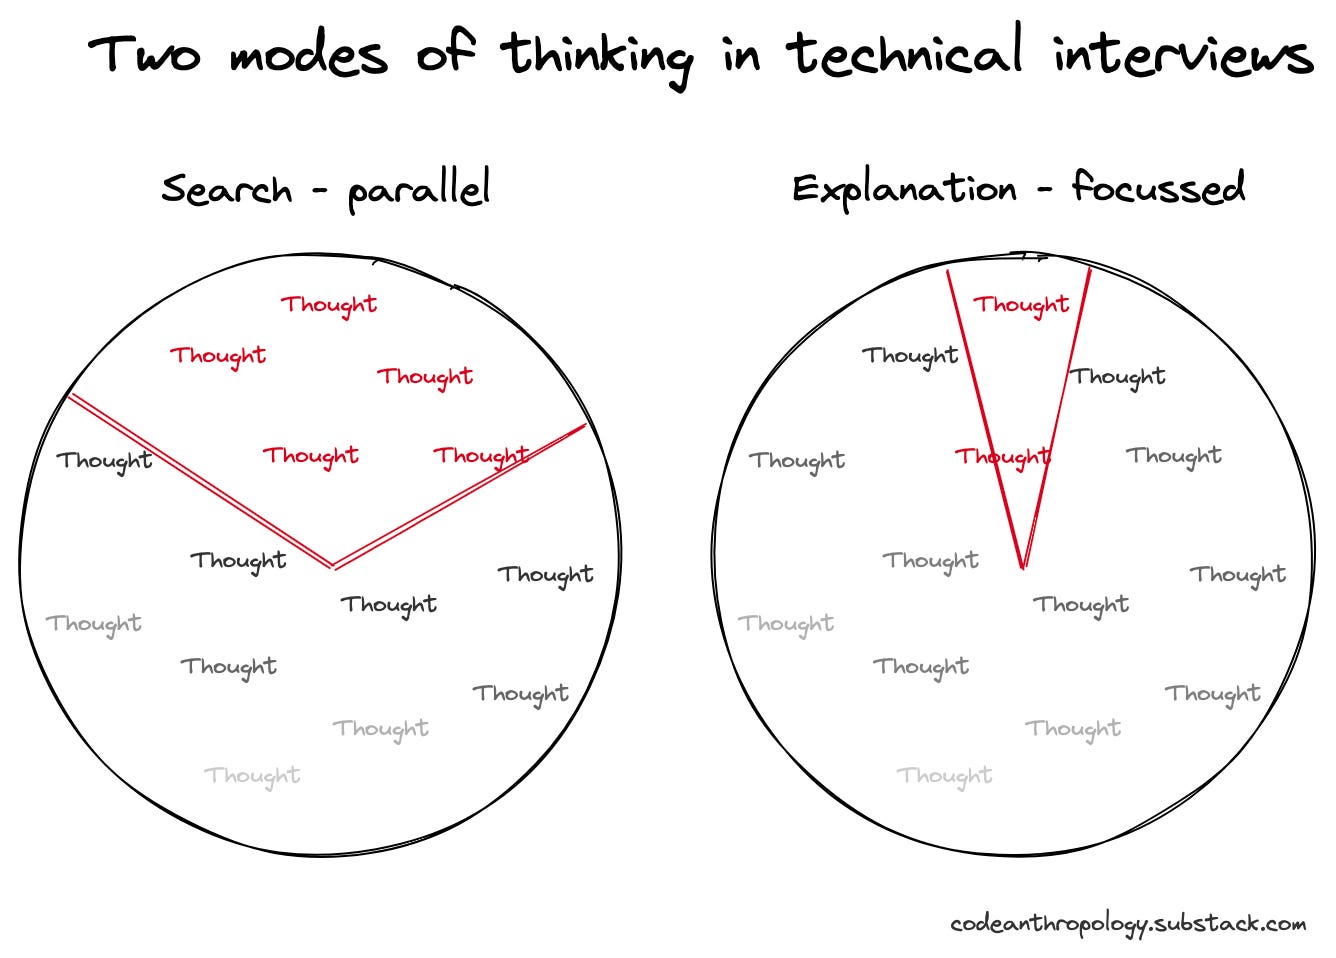 search - parallel - lots of active thoughts; explanation - focussed onto just a few thoughts